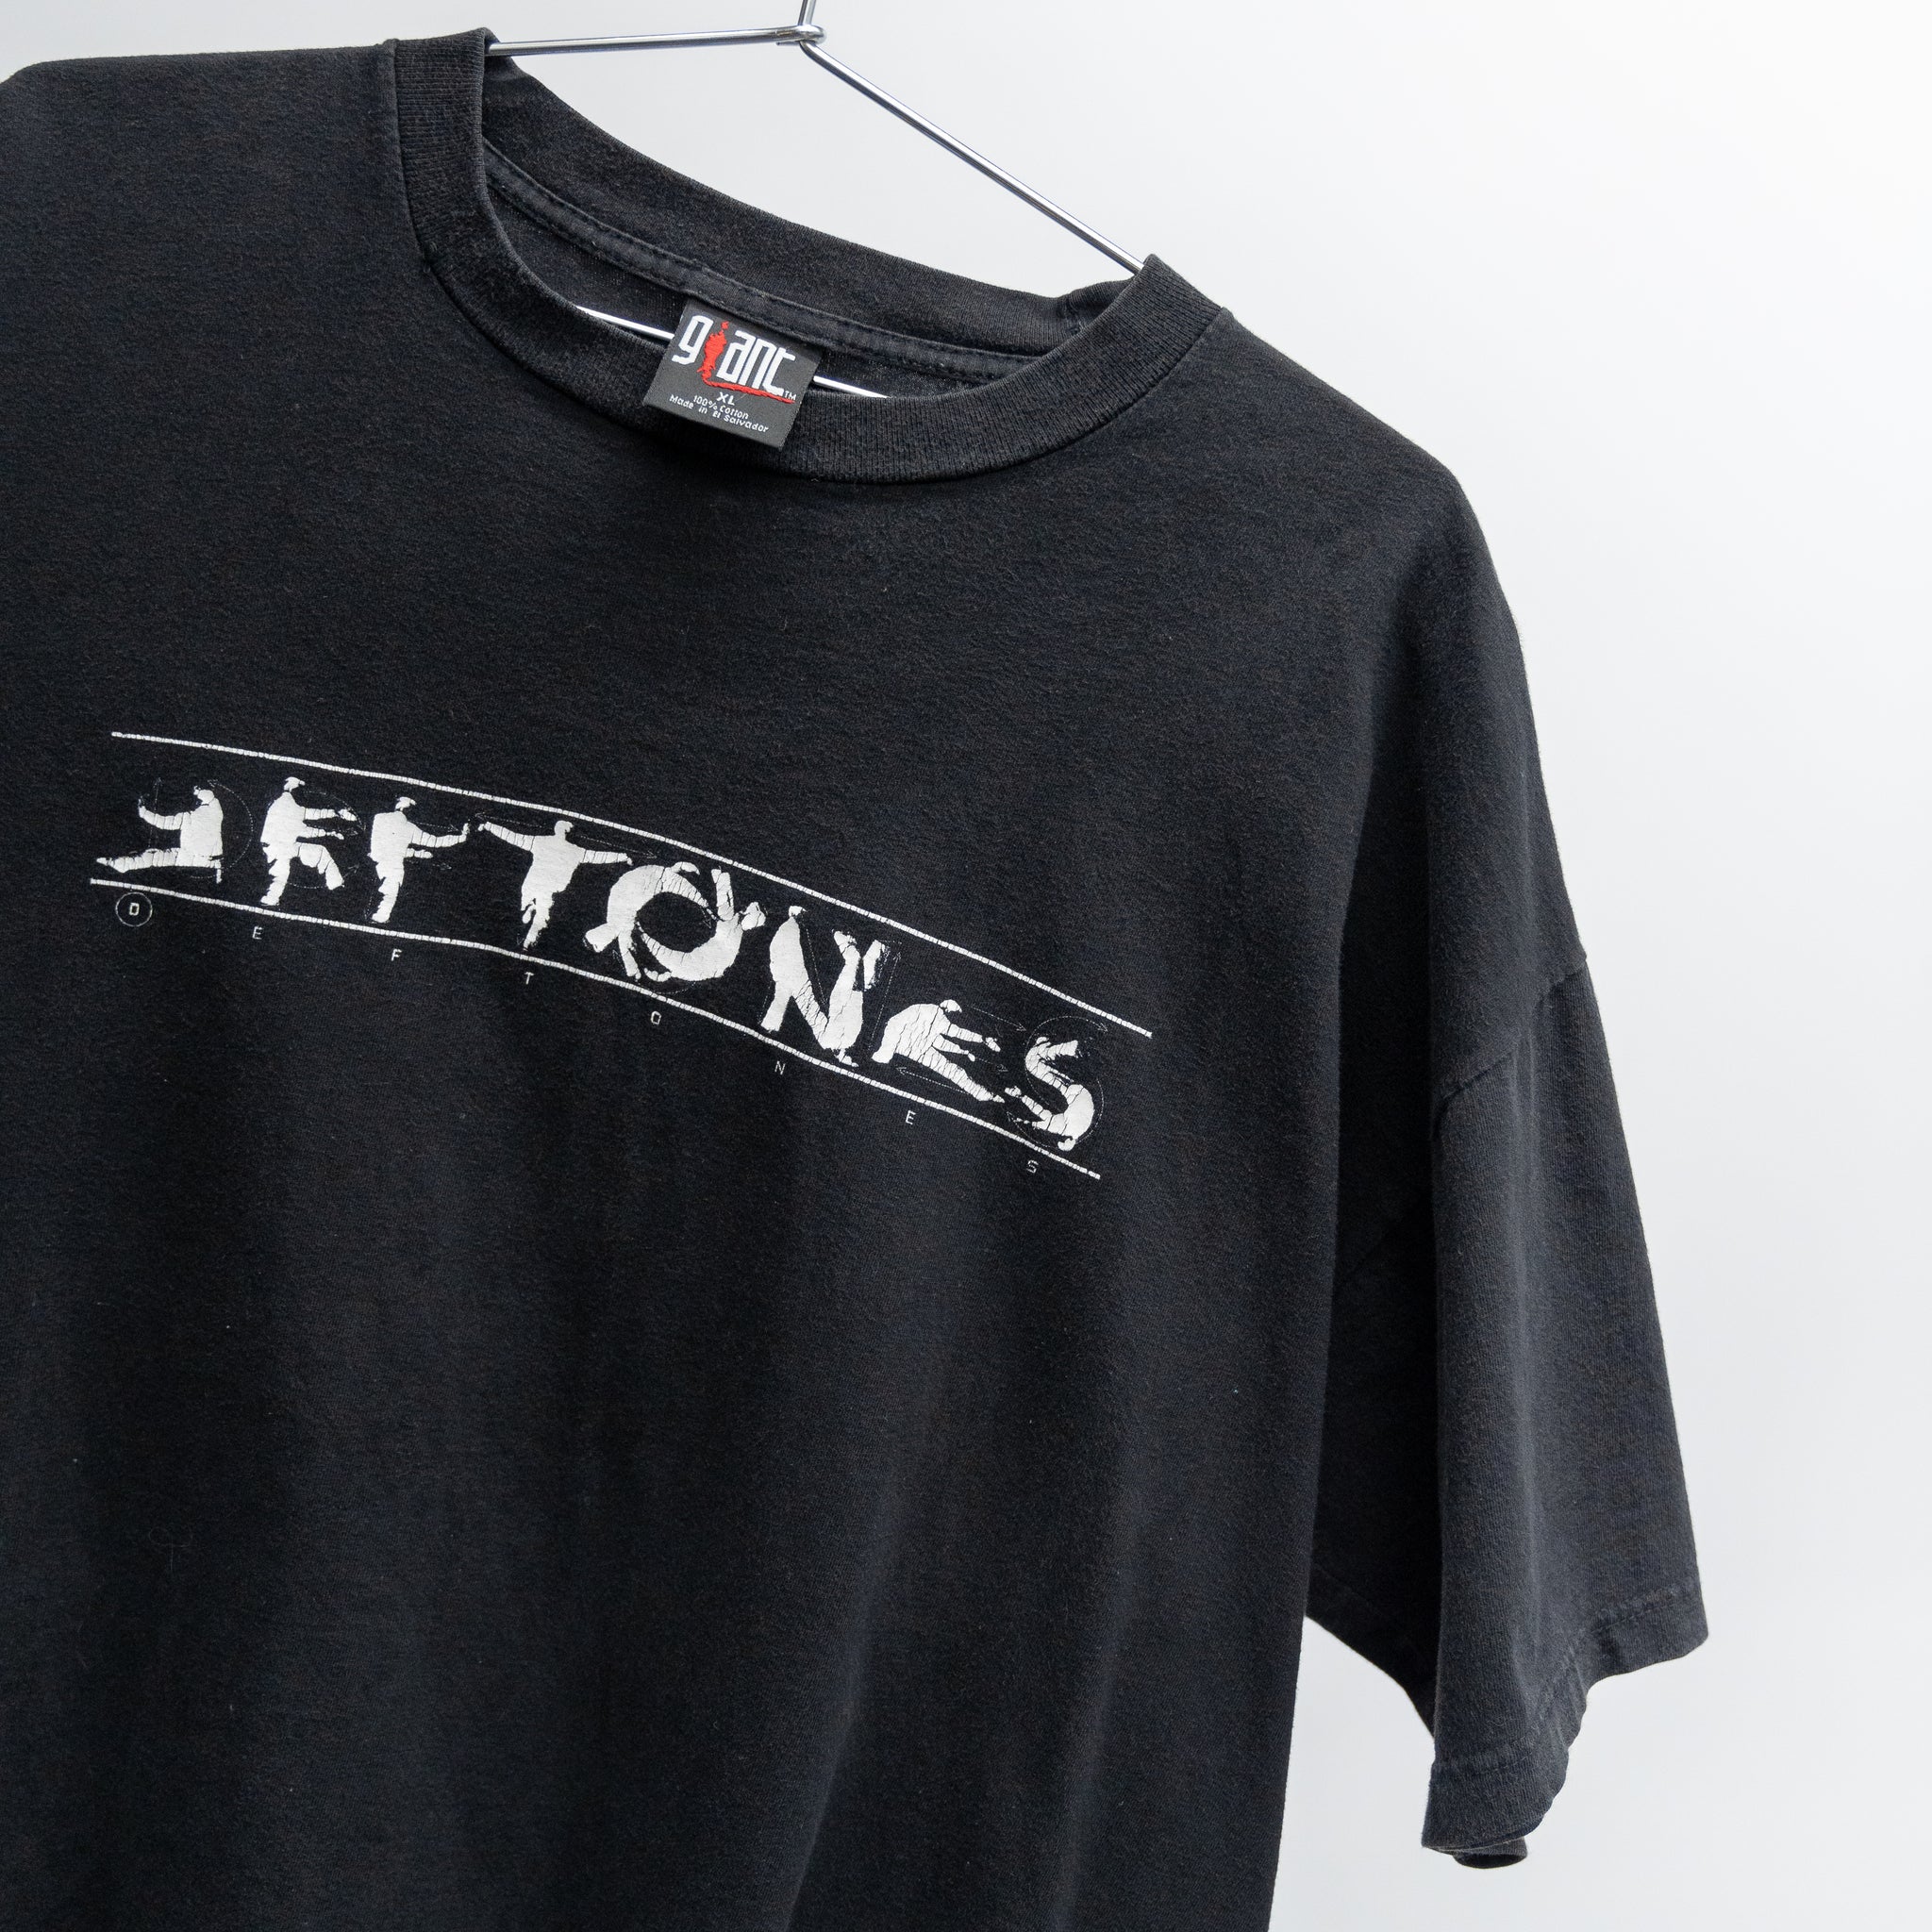 DEFTONES KARATE SPELL-OUT TEE - 1990/EARLY 2000'S